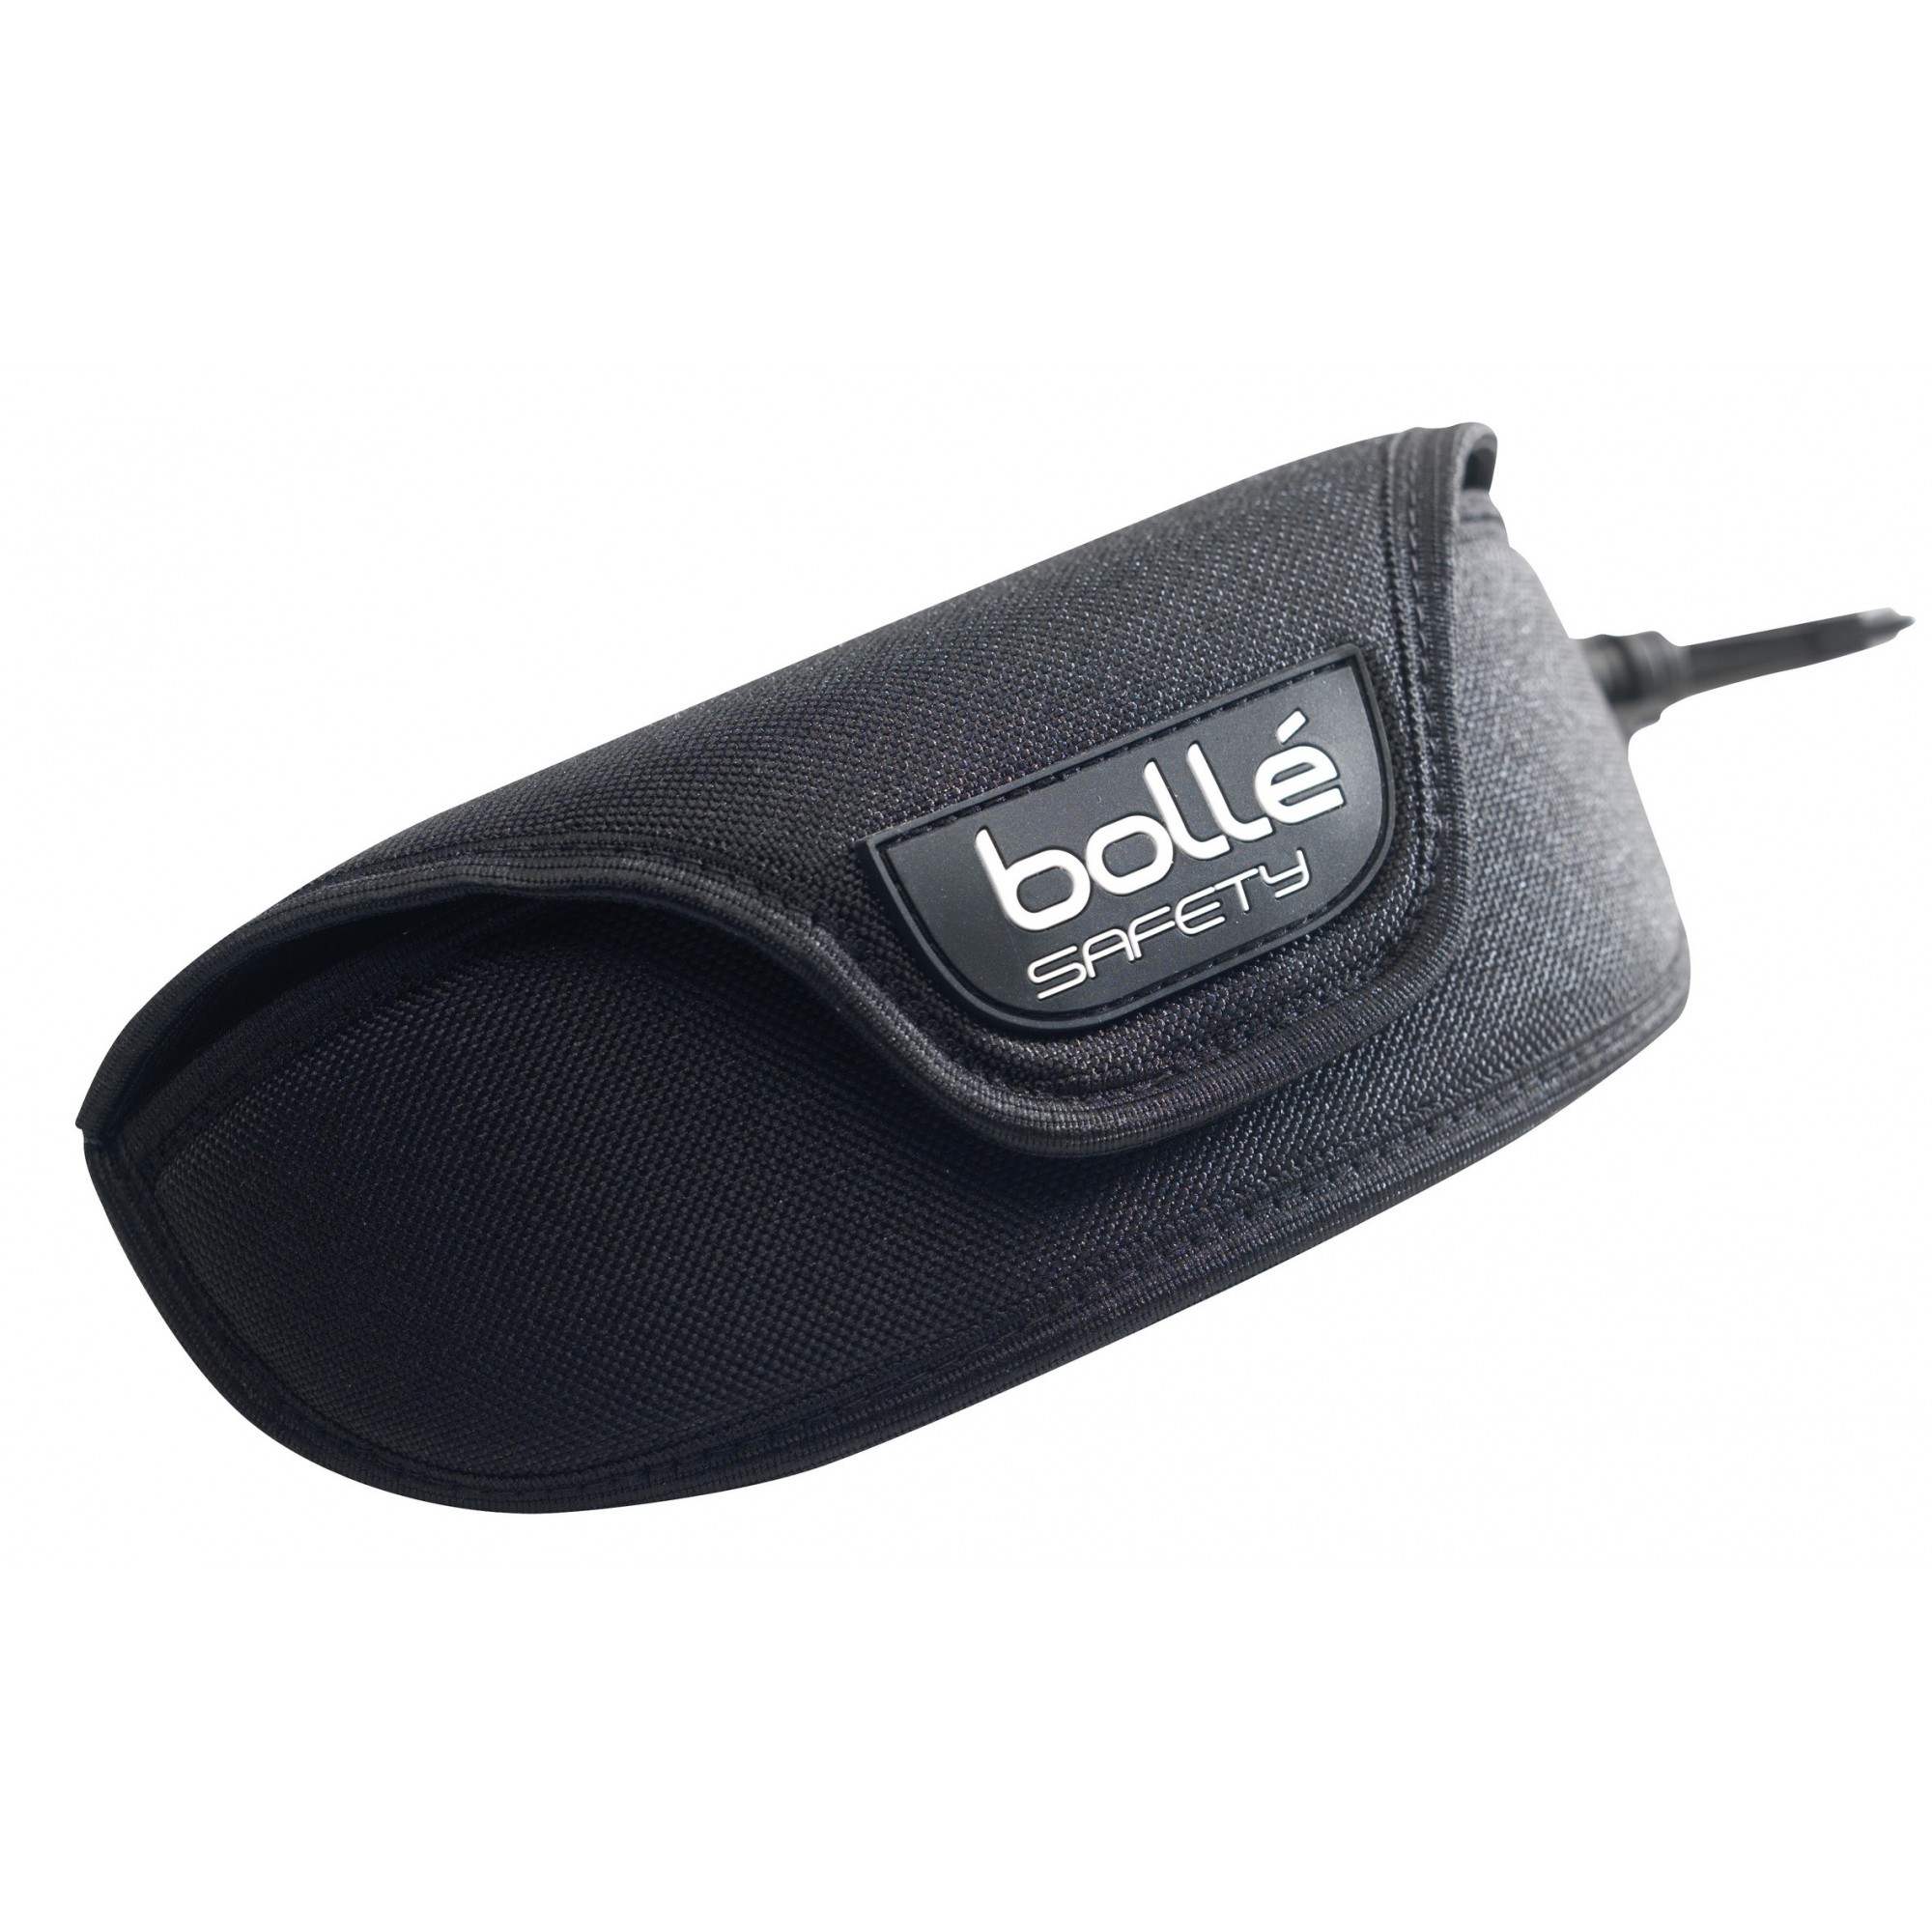 Etui banane pour lunettes - BOLLE - BOLLE SAFETY